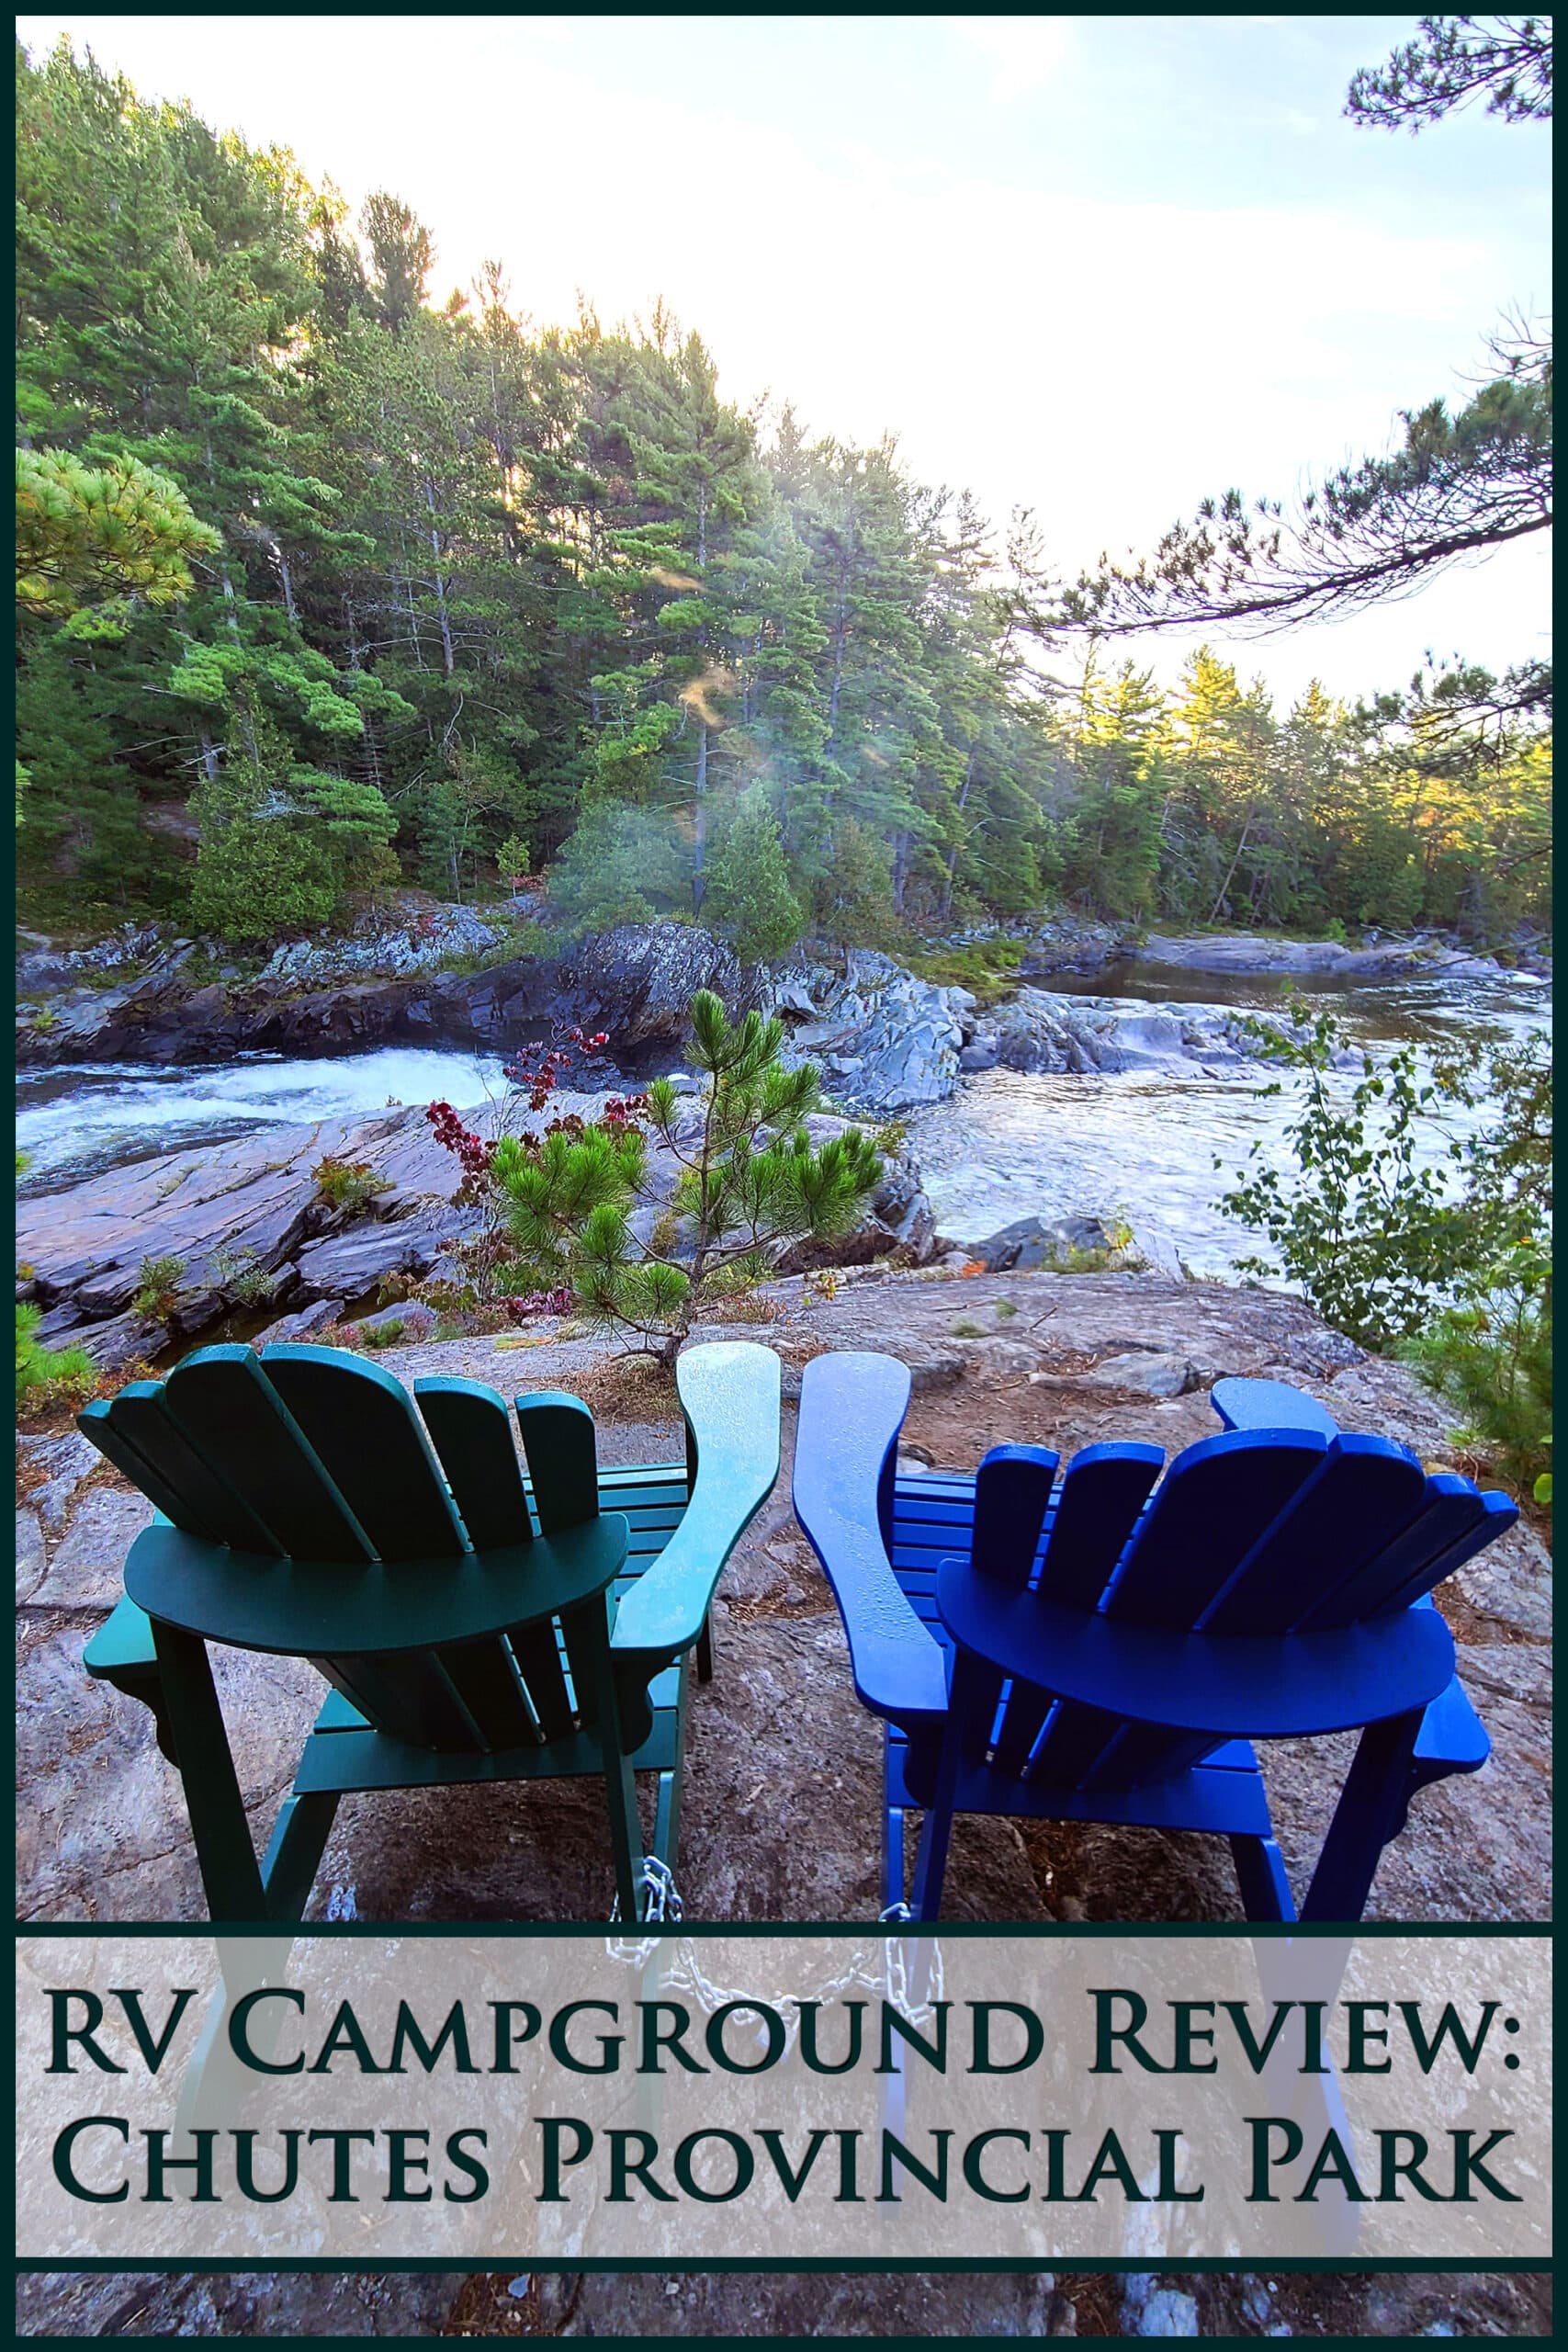 2 muskoka chairs overlooking rapids. Overlaid text says rv campground review chutes provincial park.